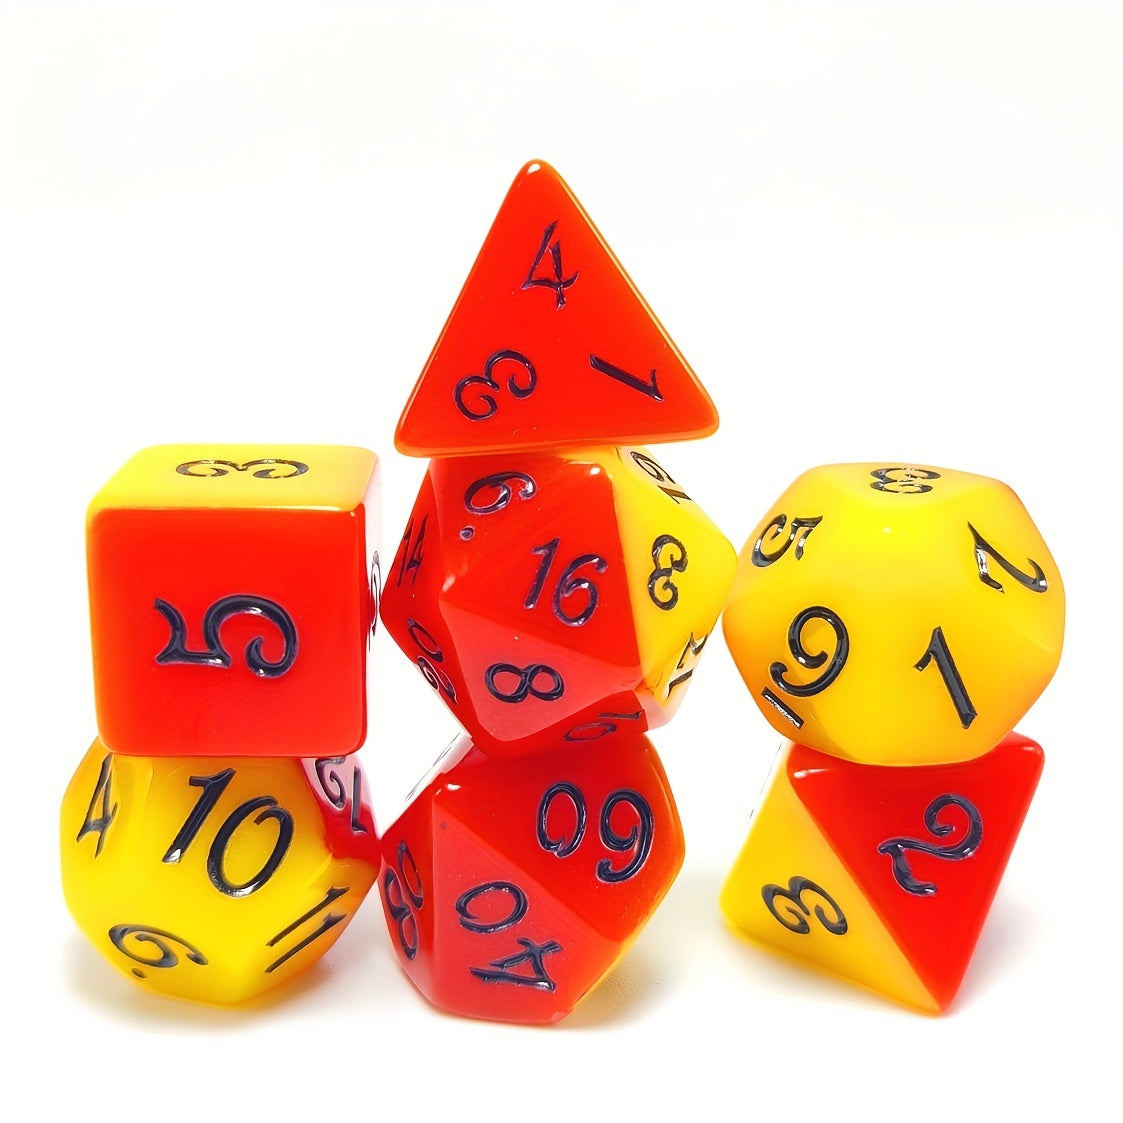 FREE Today: Red And Orange Layered Design Board Game Dice Set